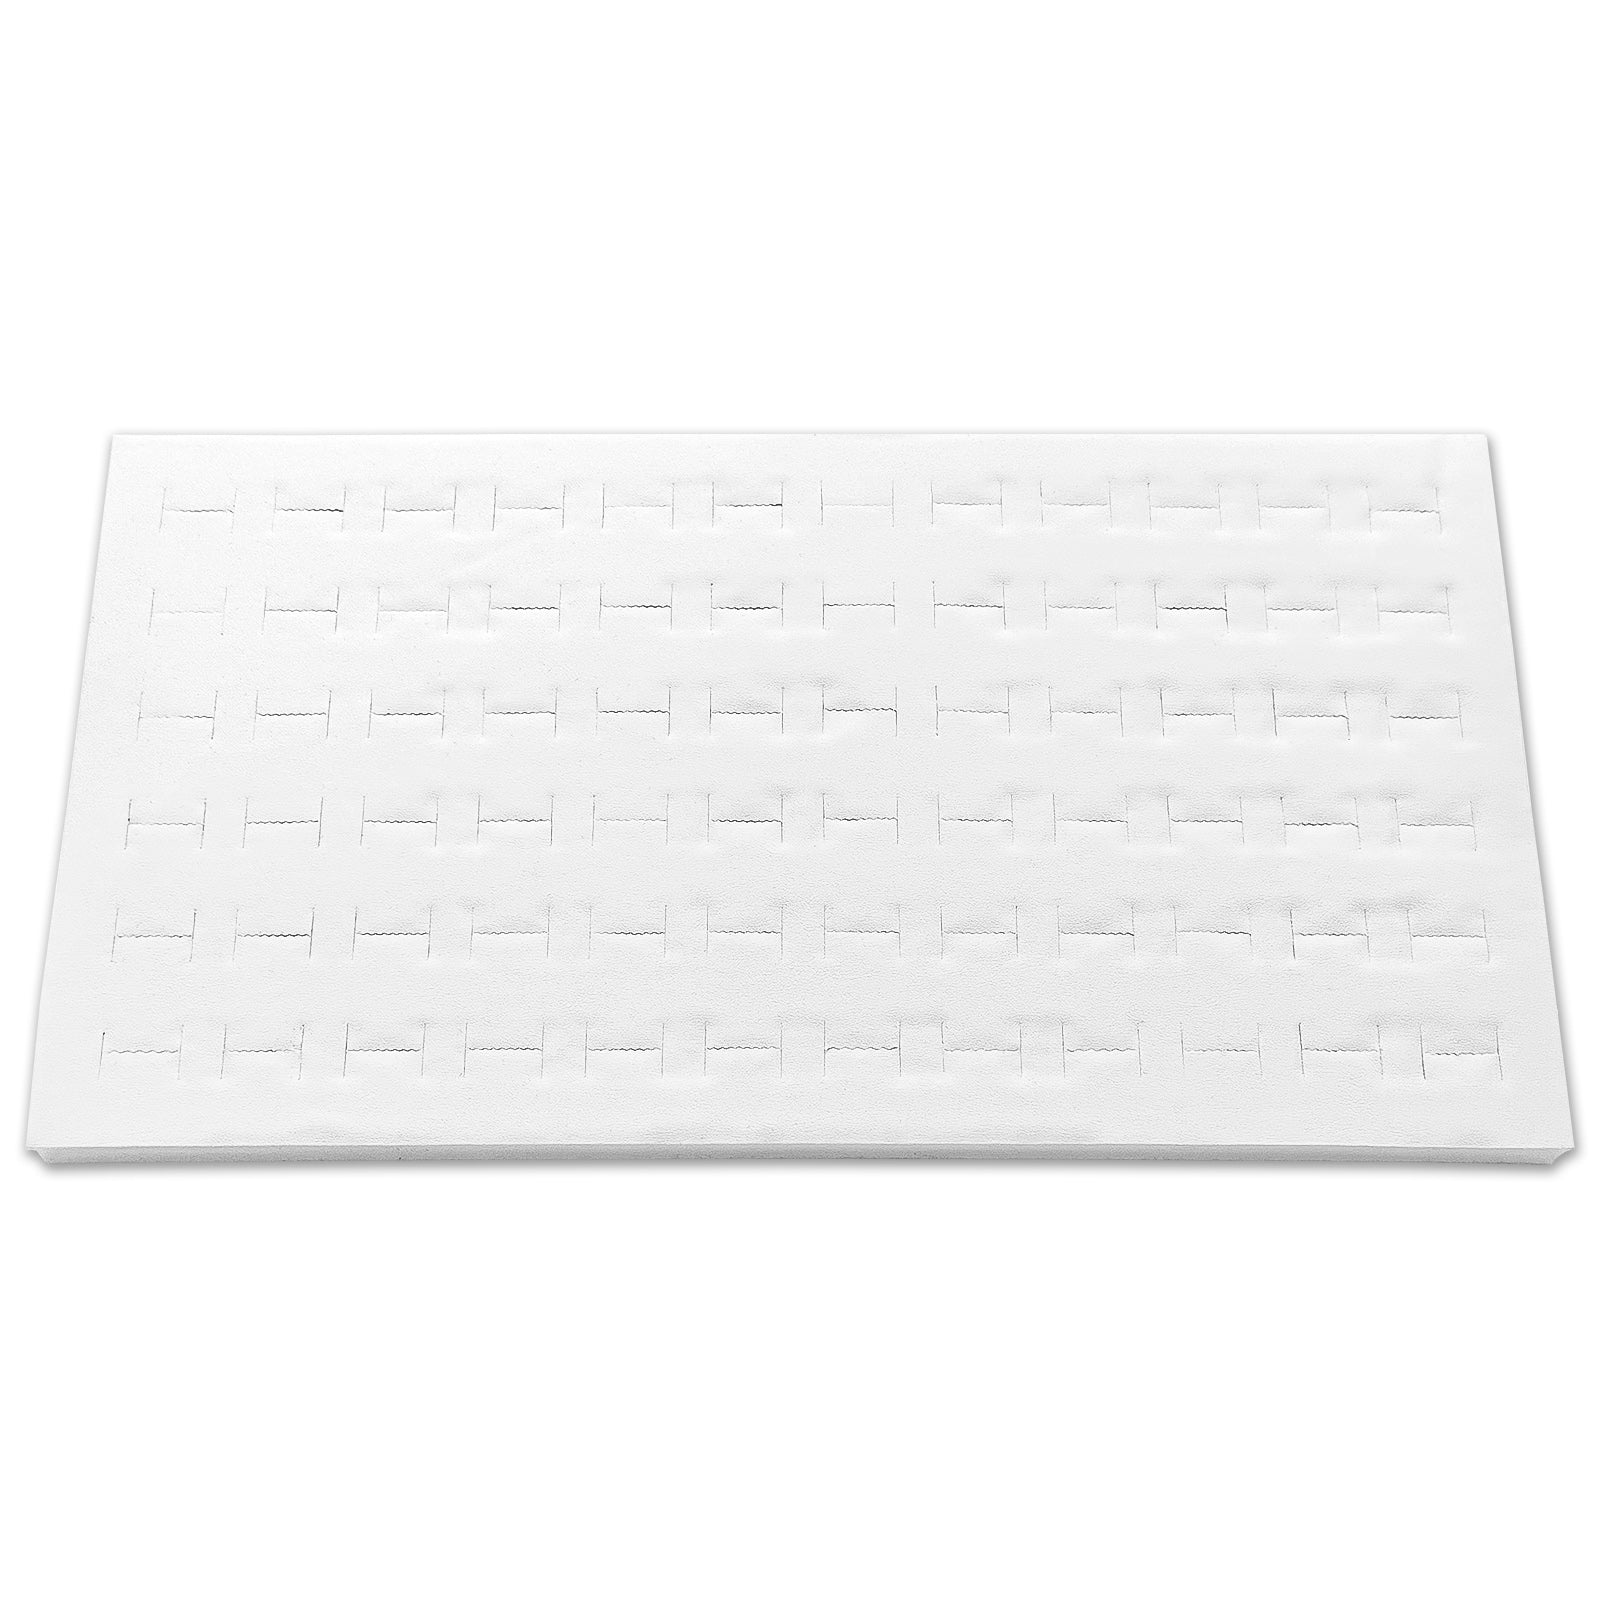 cBox CuteBox Company White Plastic Tray (14.75 x 8.25 x 1) with Red 72  Slot Ring Foam Insert and 100pc White String Tags for Pricing